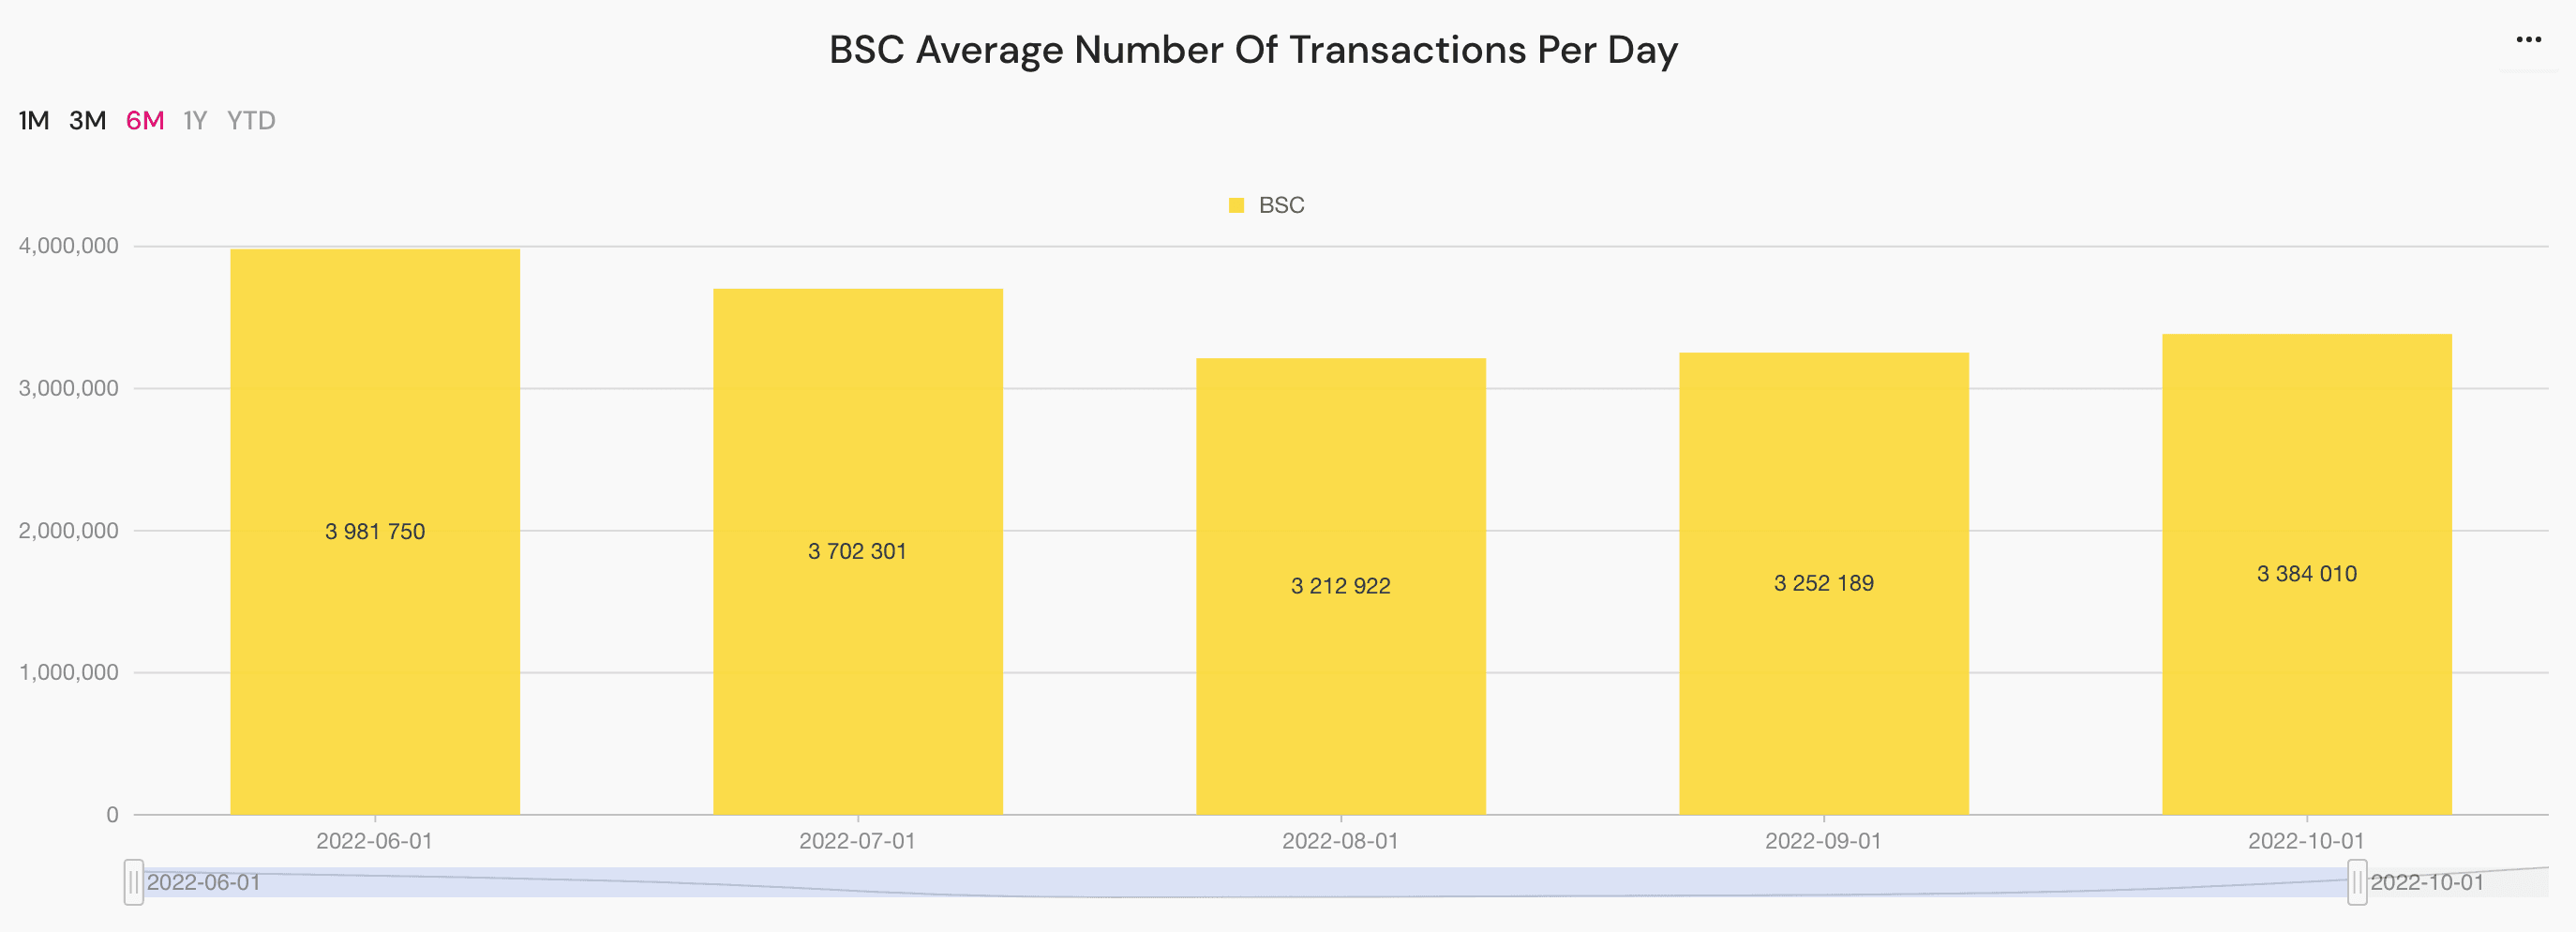 BSC average number of transactions per day